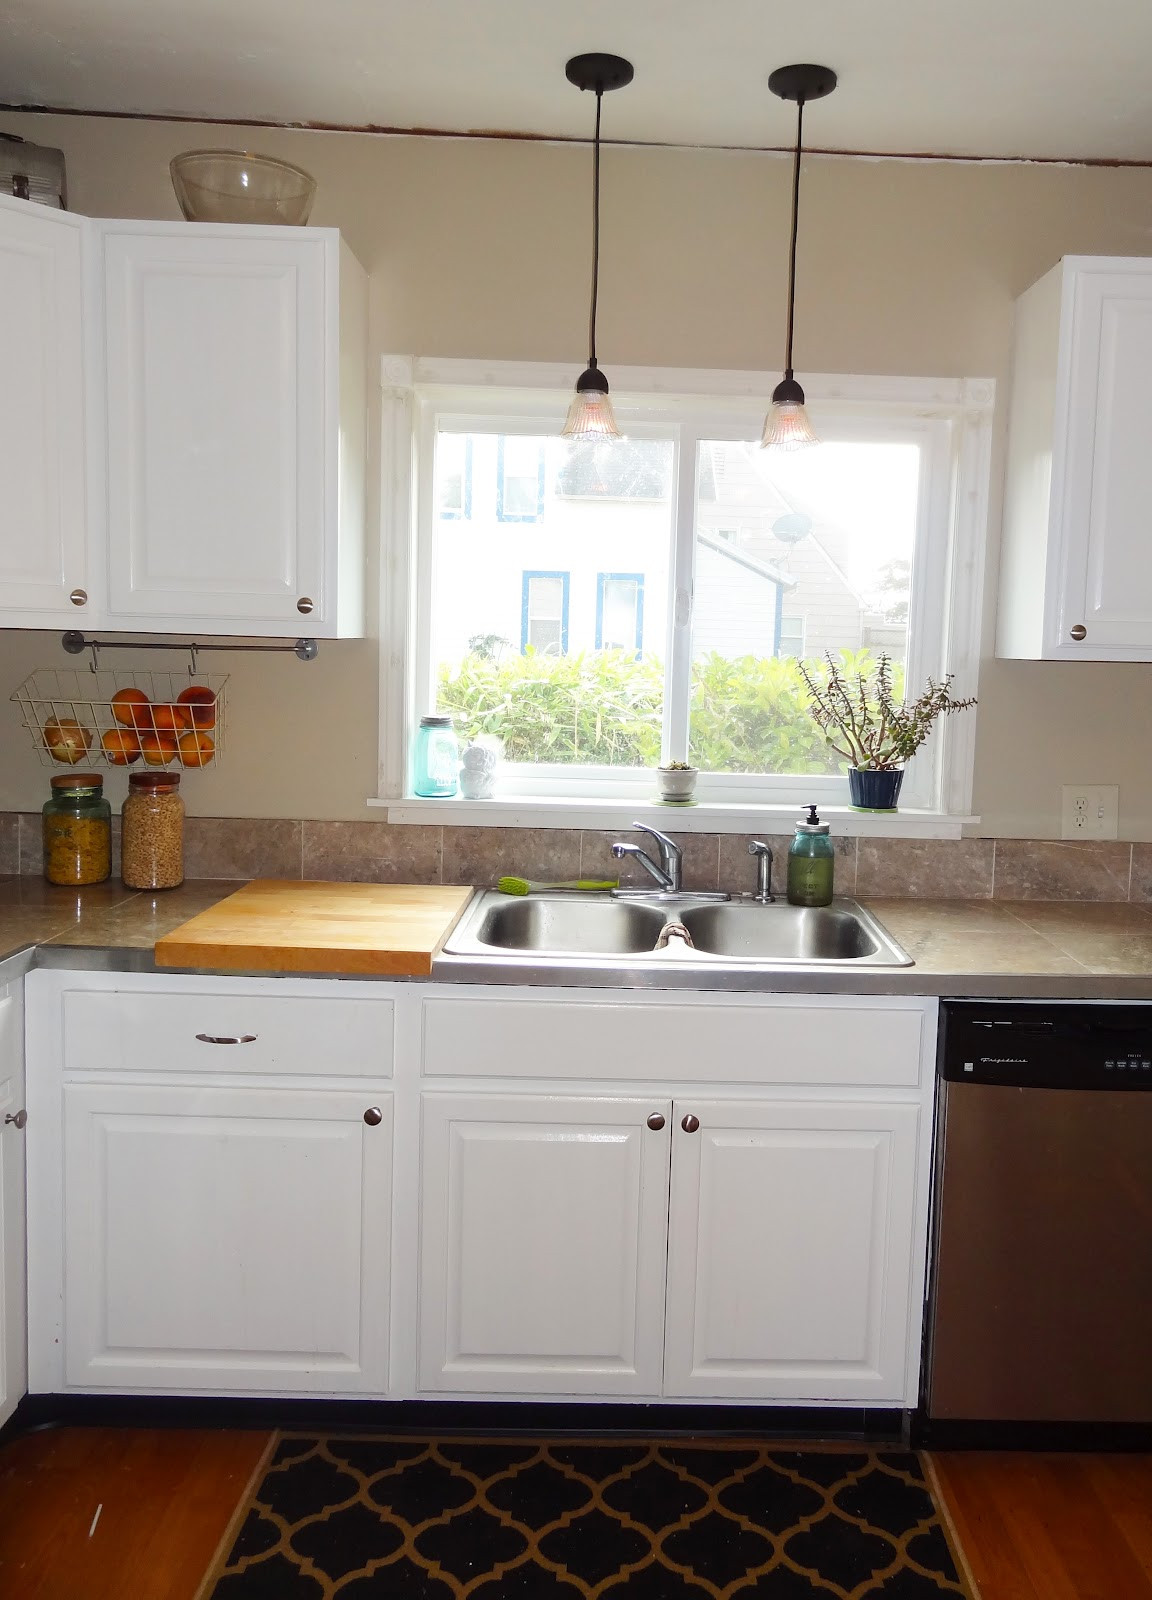 Lighting For Above Kitchen Sink
 Most Re mended Lighting over Kitchen Sink – HomesFeed